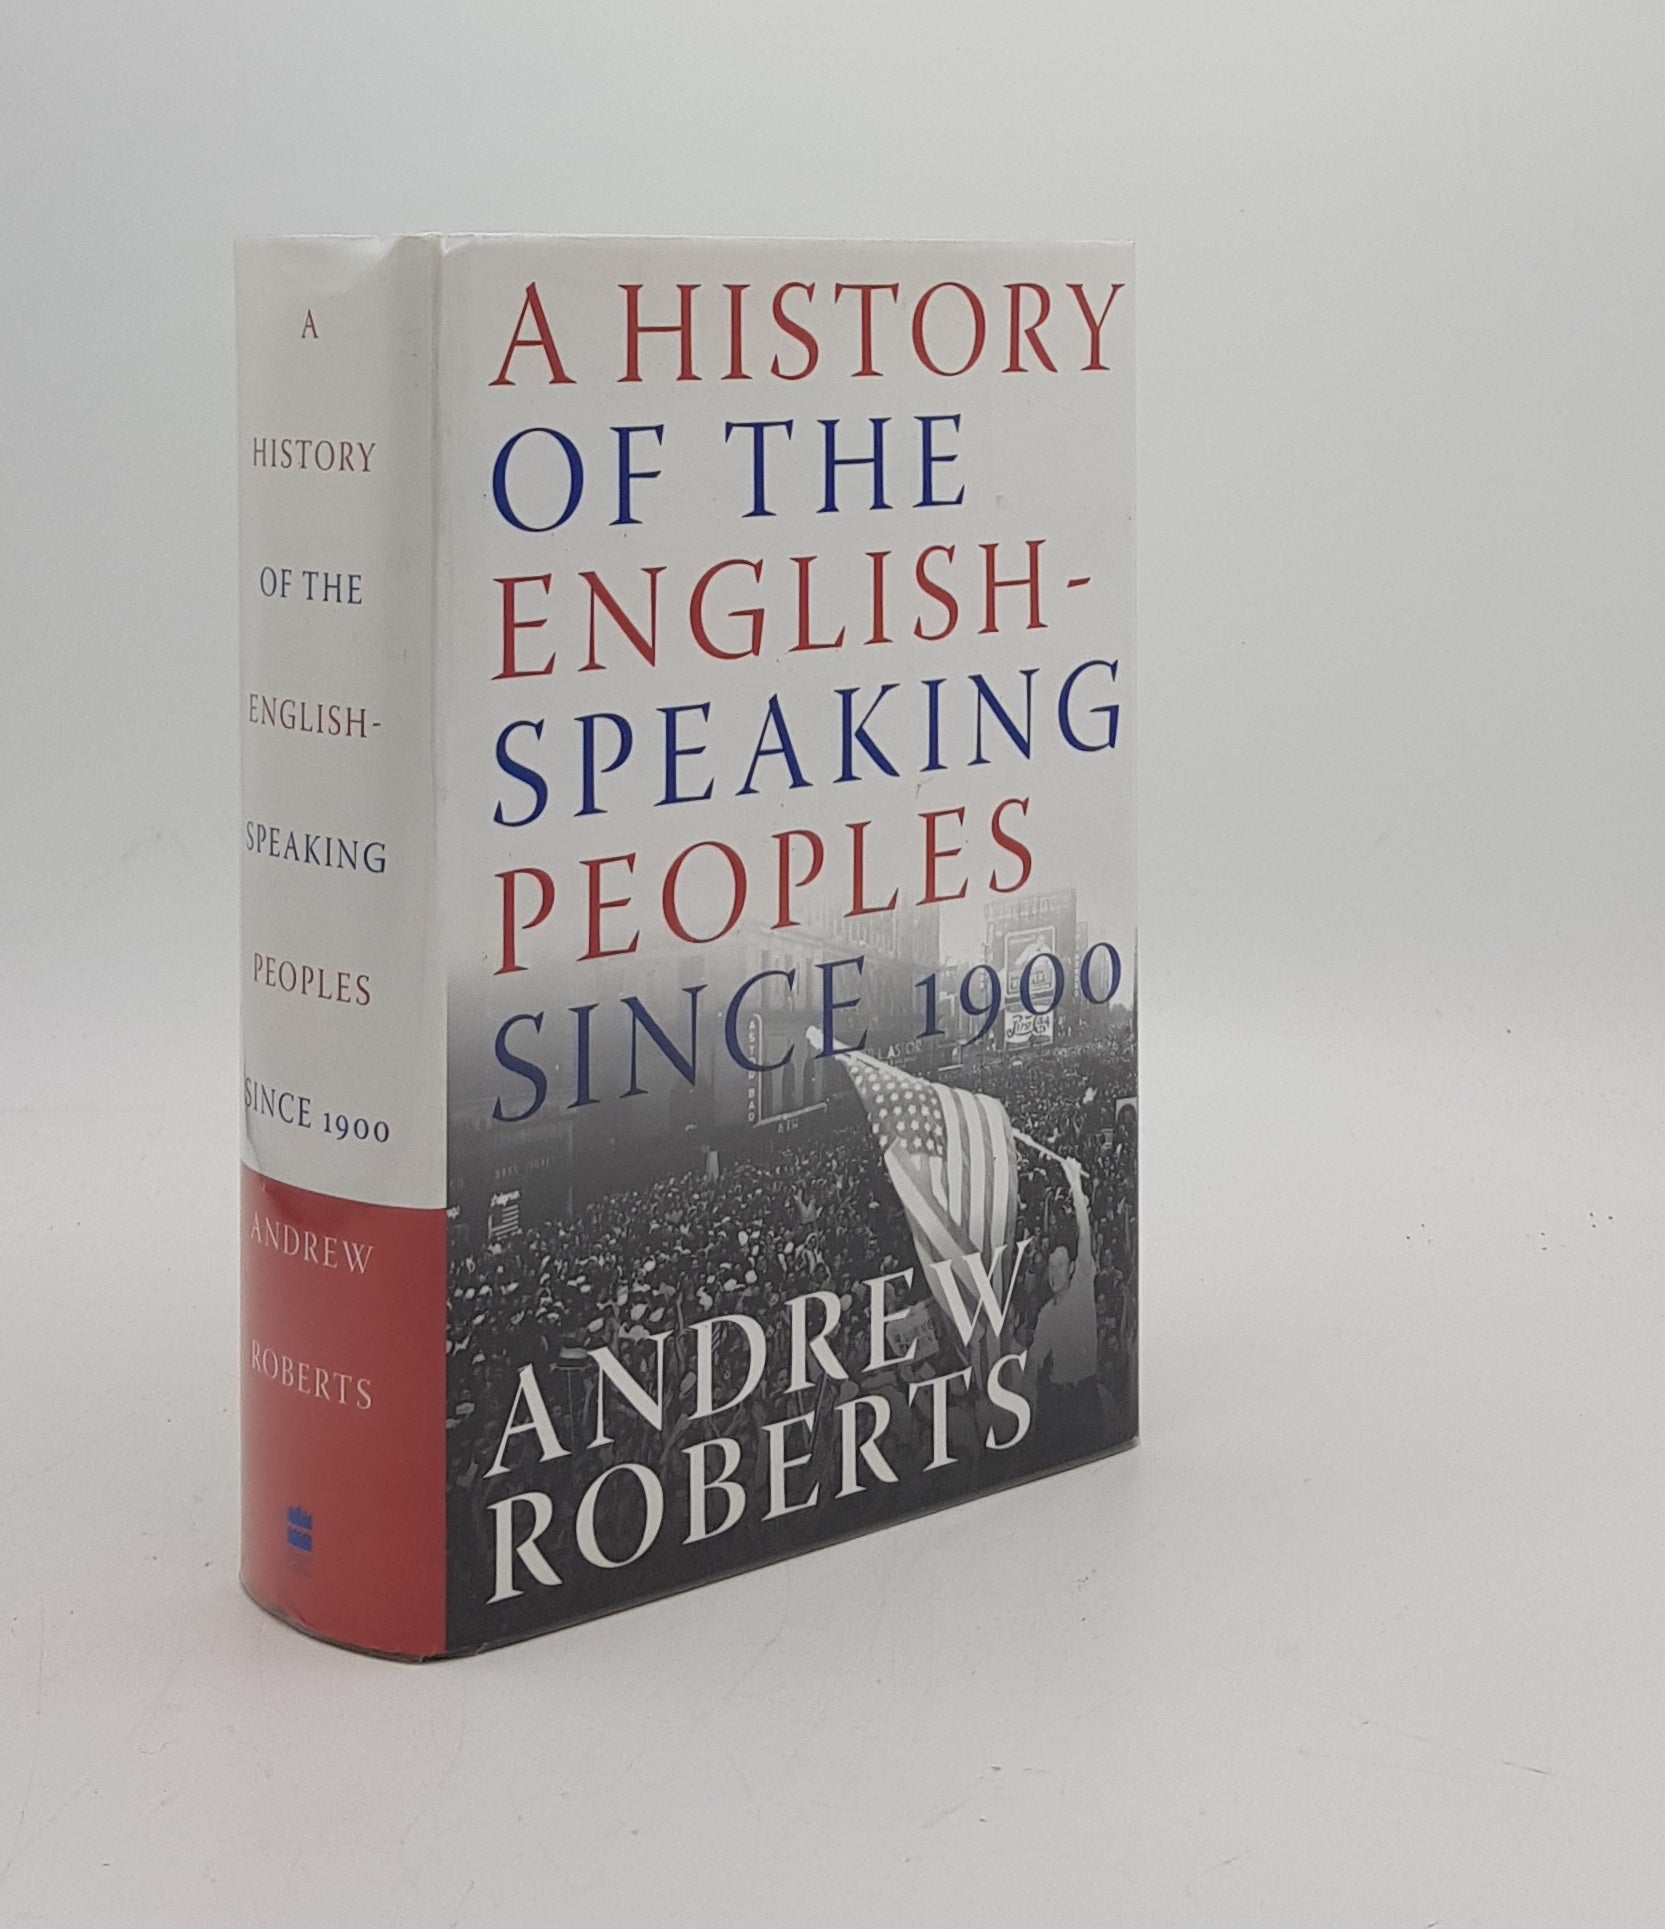 ROBERTS Andrew - A History of the English-Speaking Peoples Since 1900